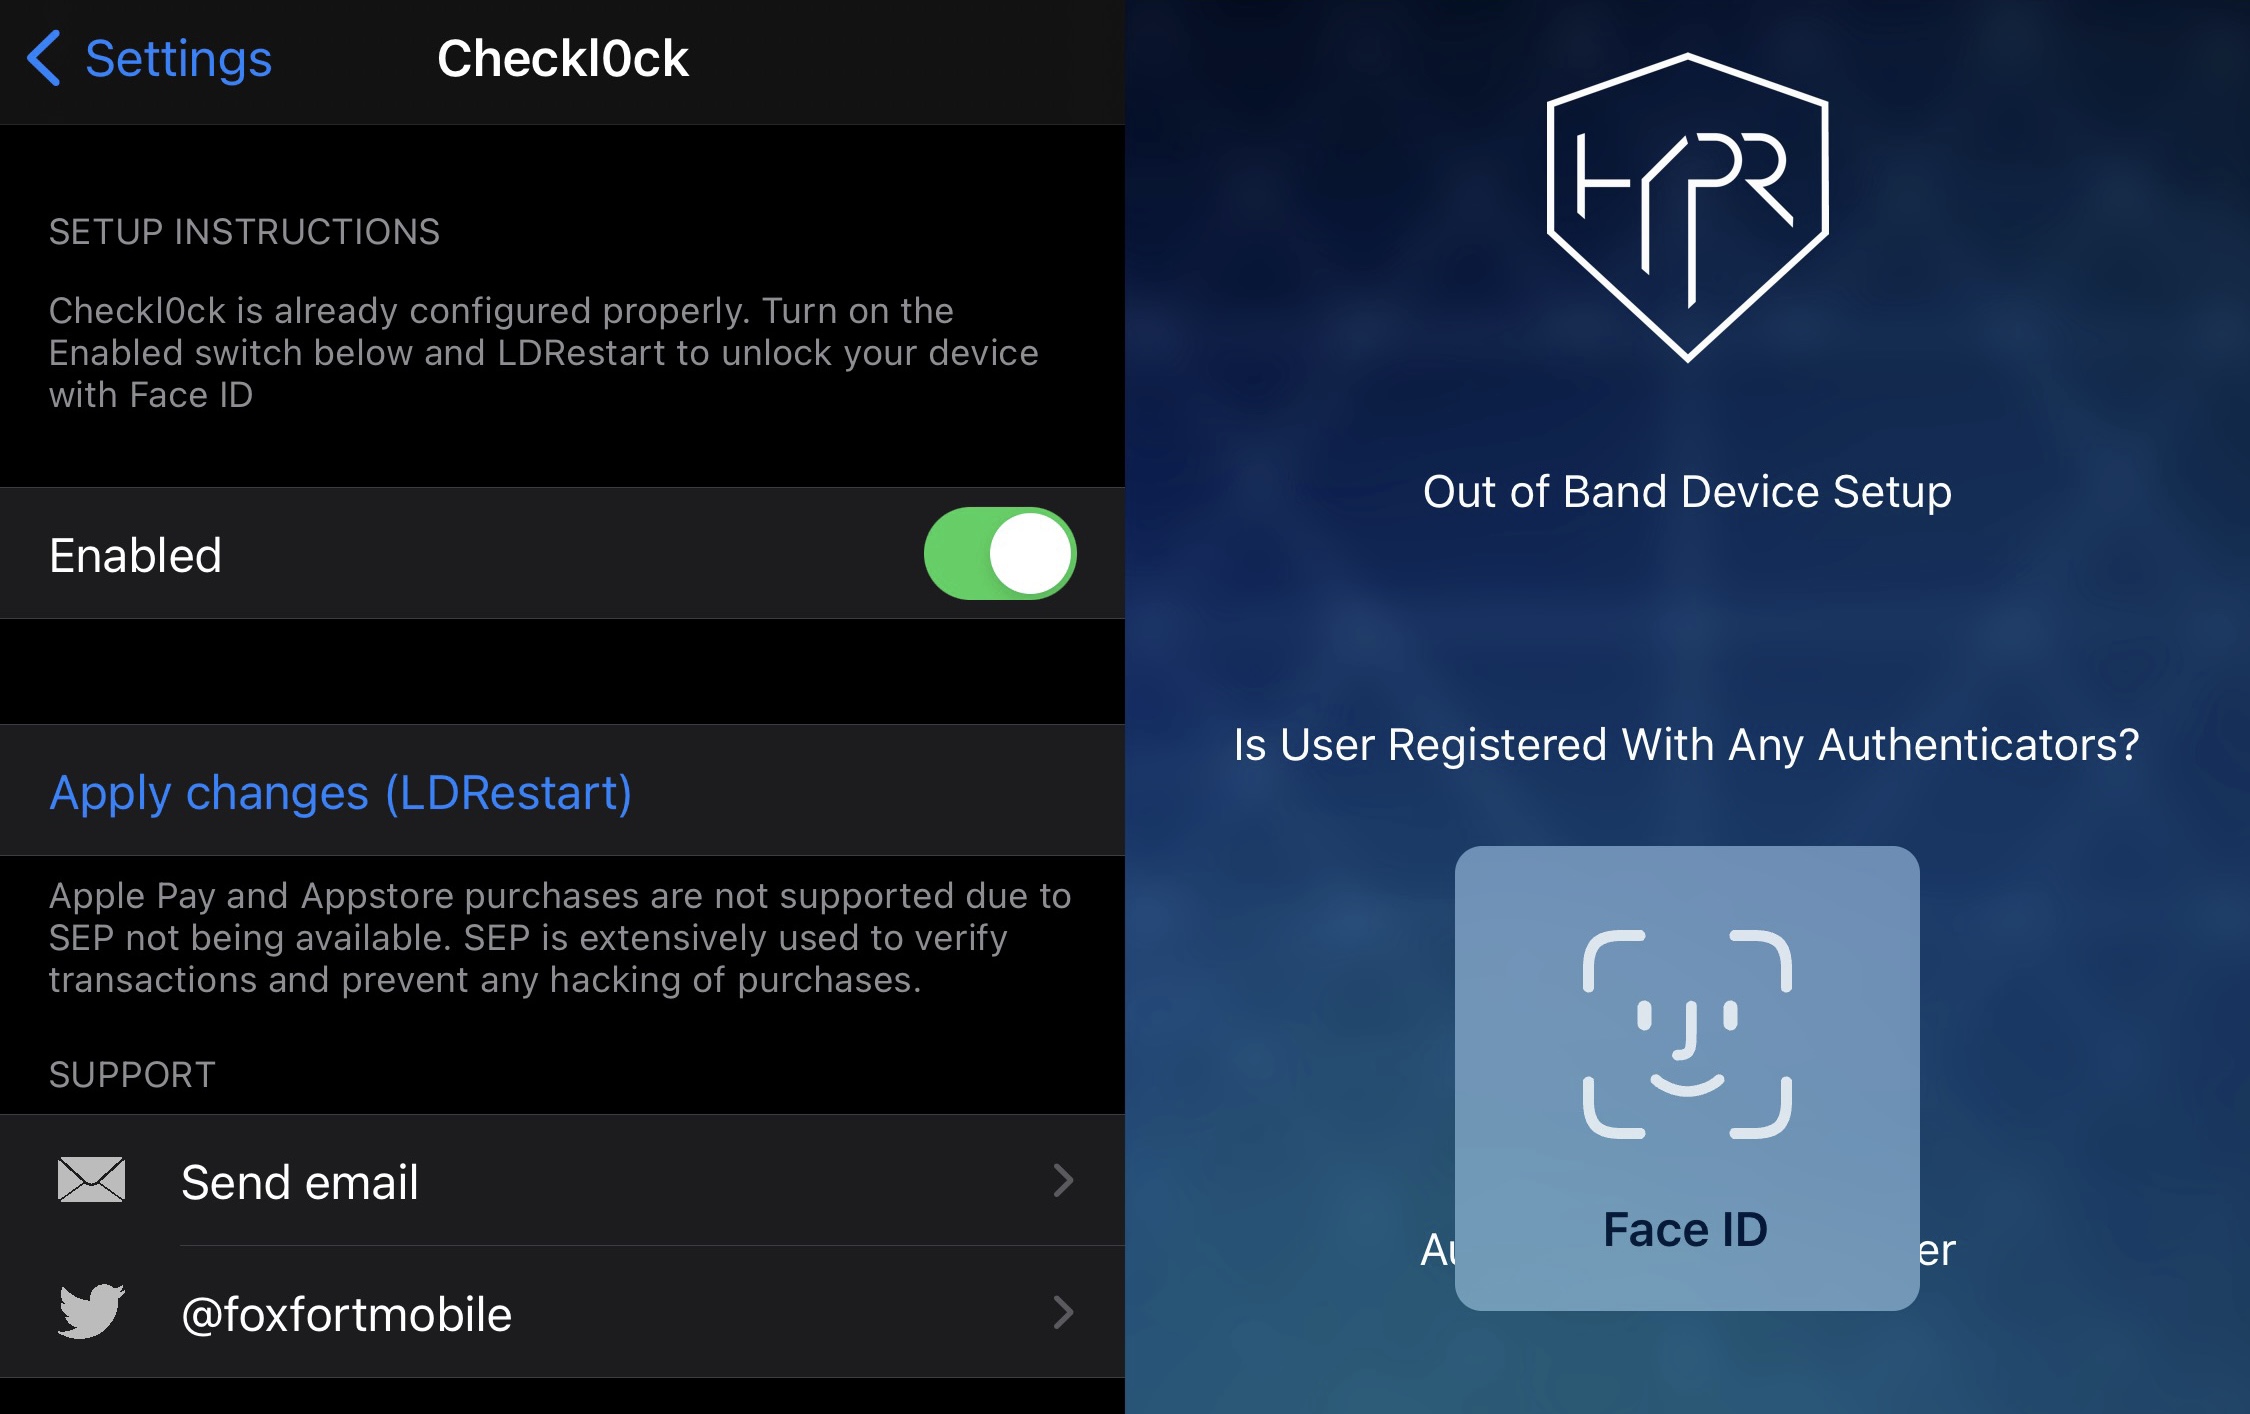 Checkl0ck enables Face ID and Touch ID on checkm8-vulnerable jailbroken devices.